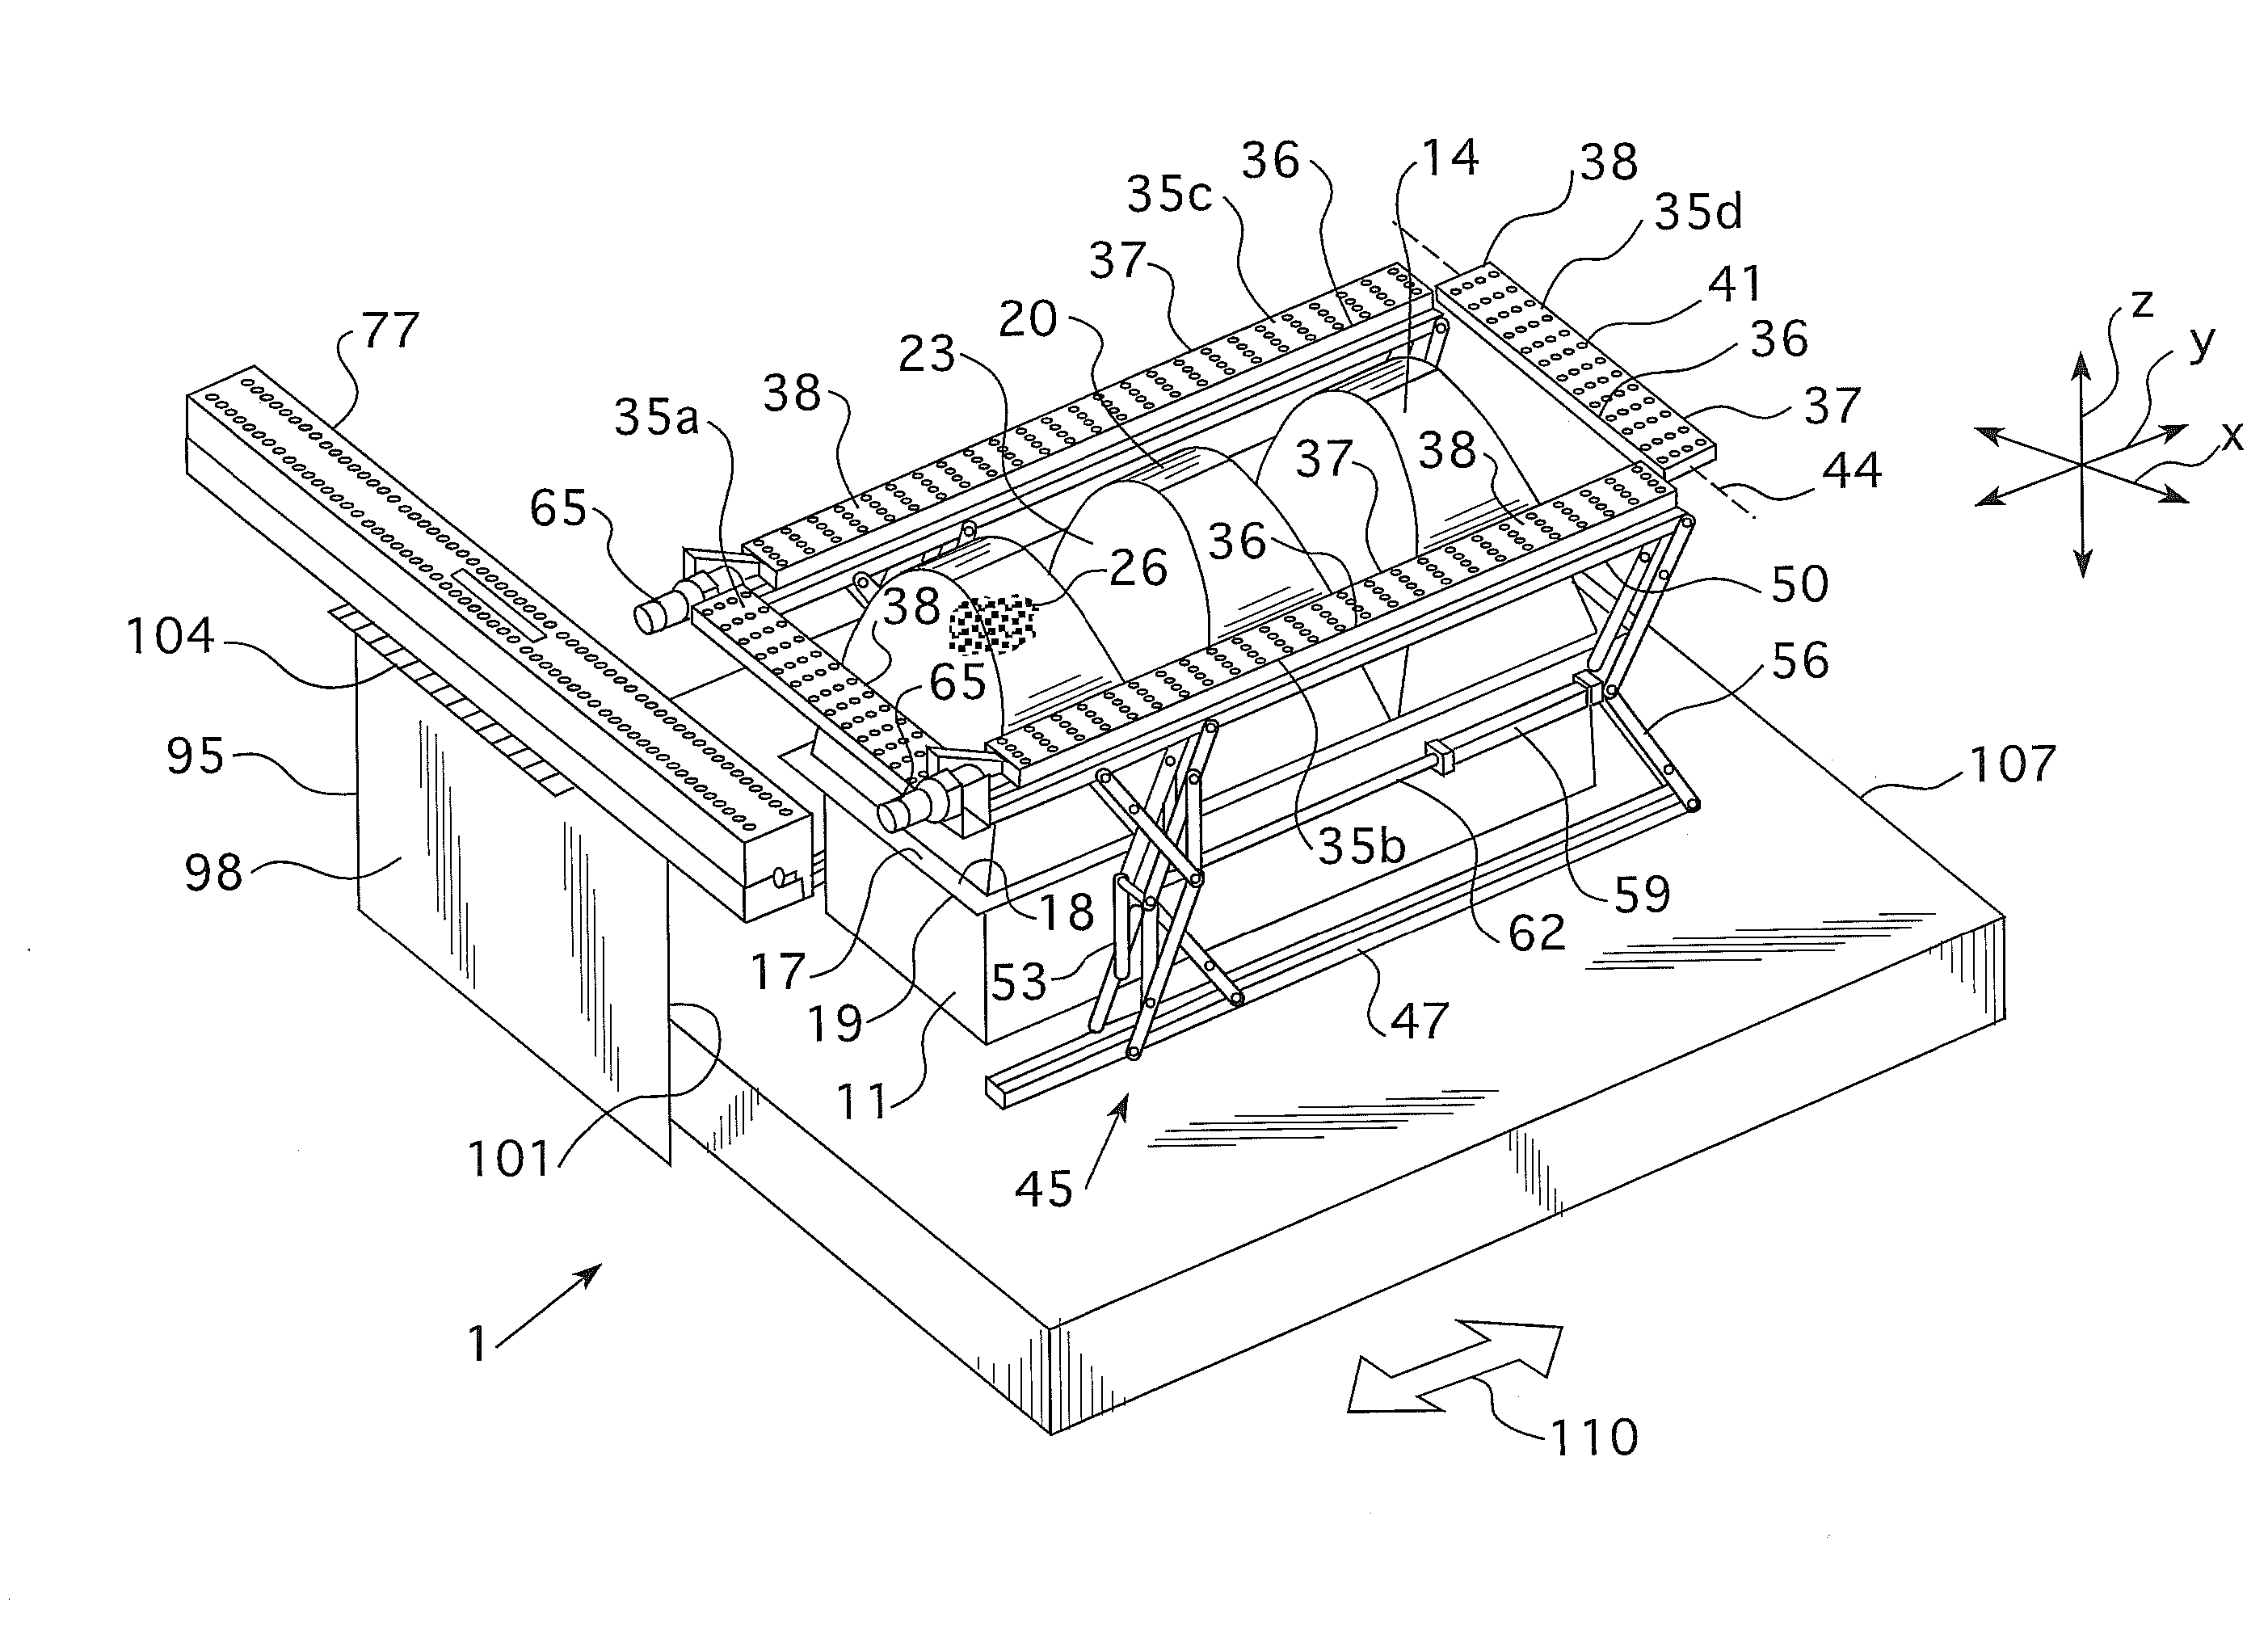 Method of preparing a molded article